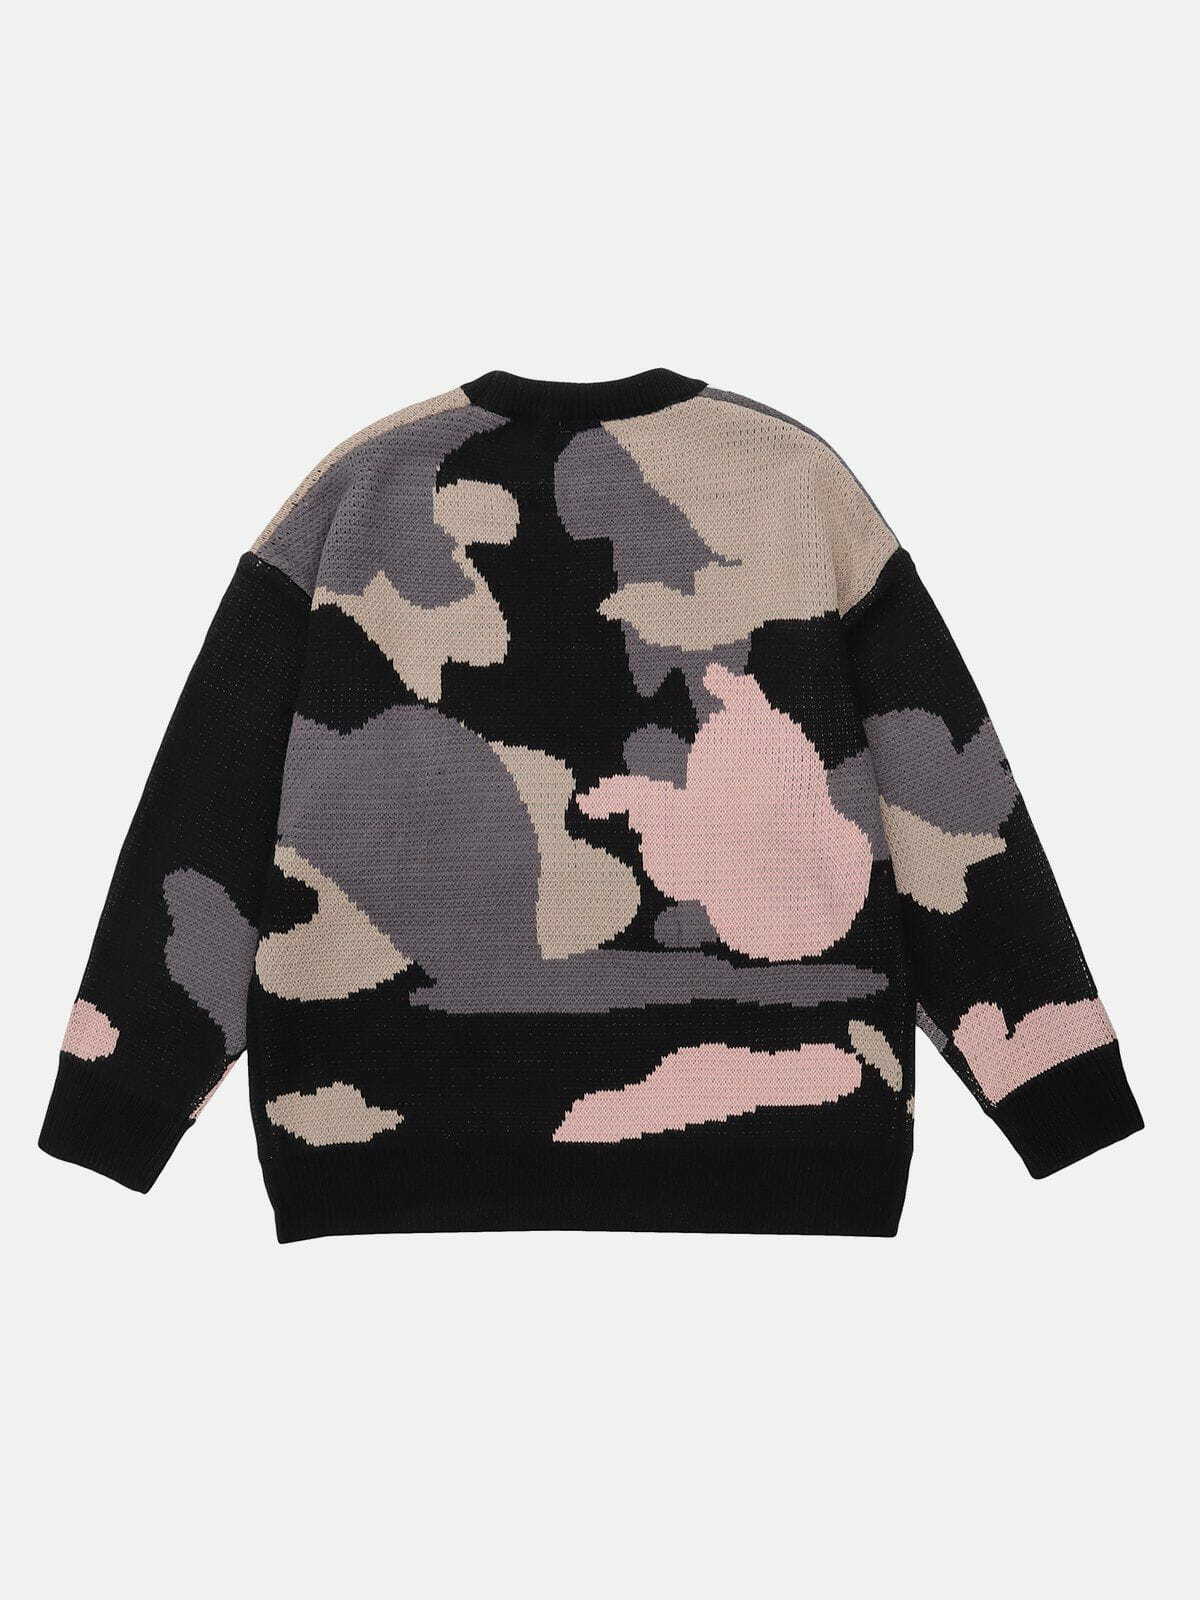 abstract graphic sweater edgy streetwear statement 3279